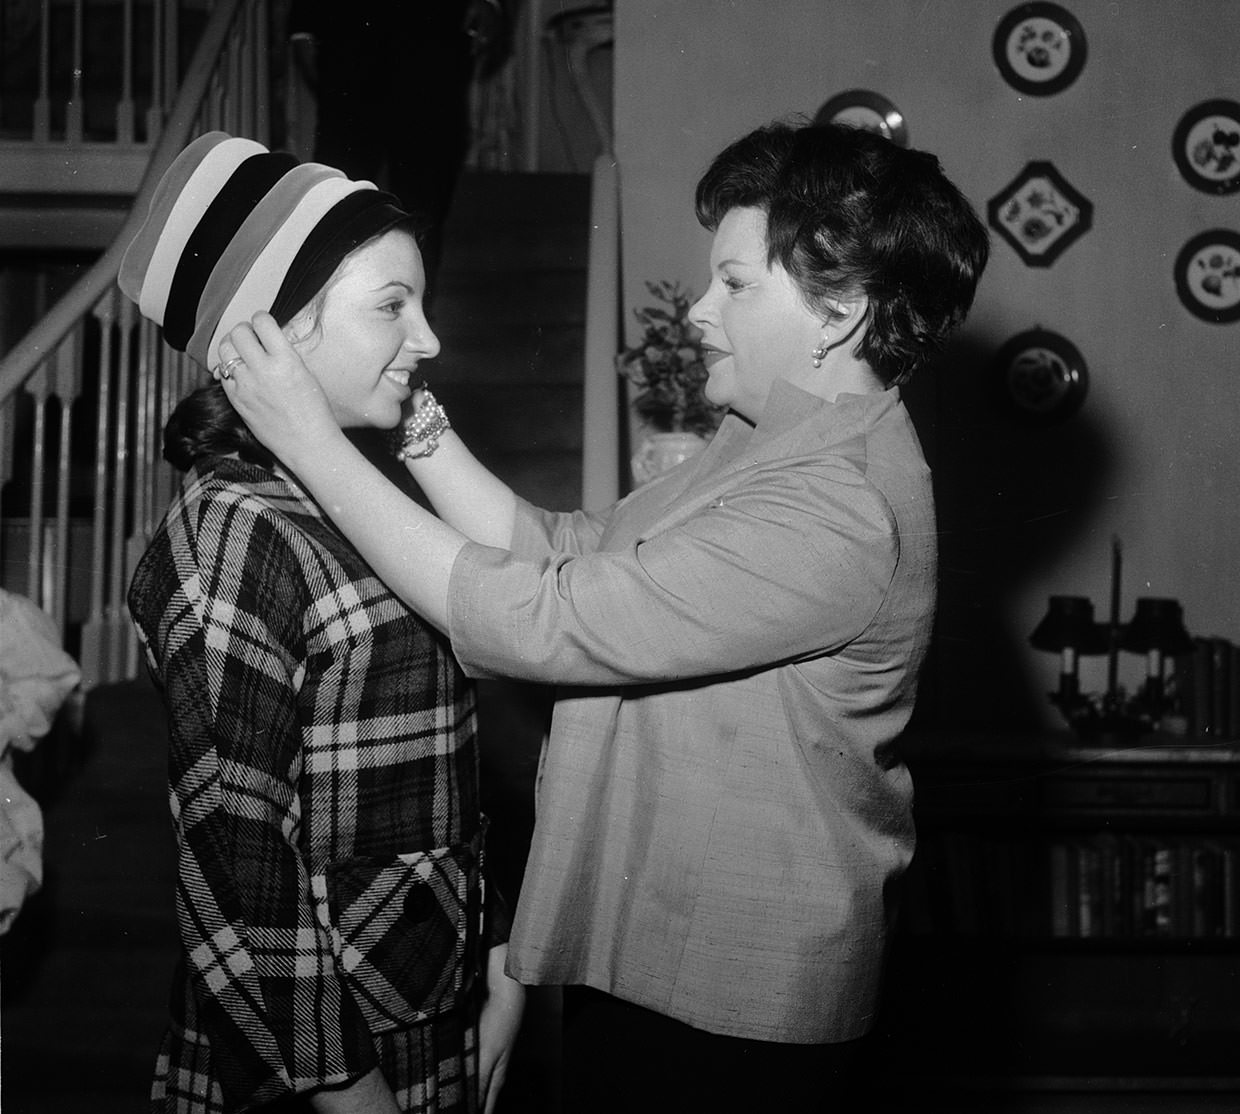 14 year old Liza Minnelli with her mother Judy Garland in London in 1960.